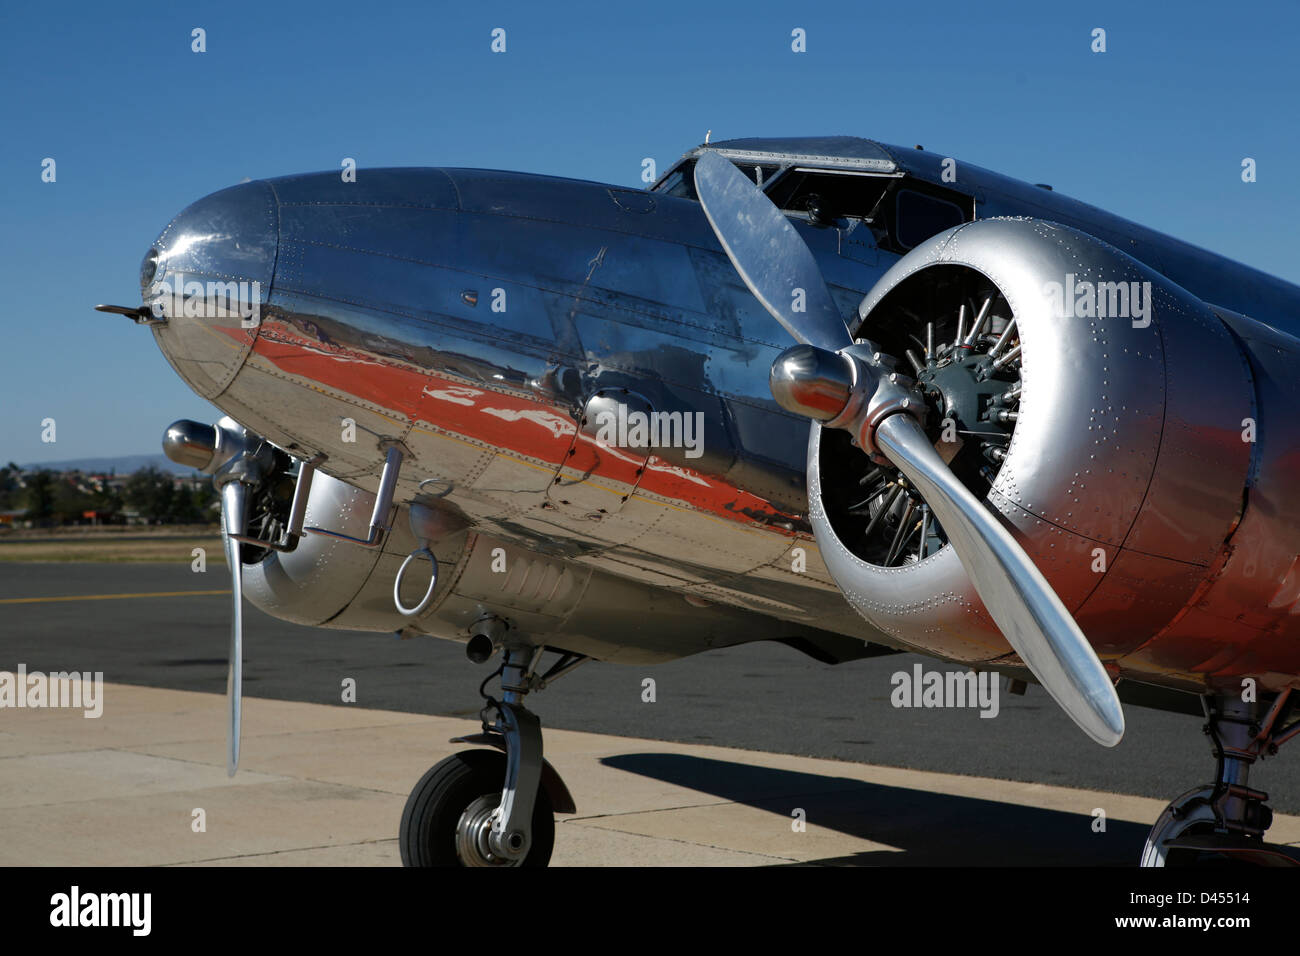 Lockheed Electra 12A, Twin propeller airplane Stock Photo